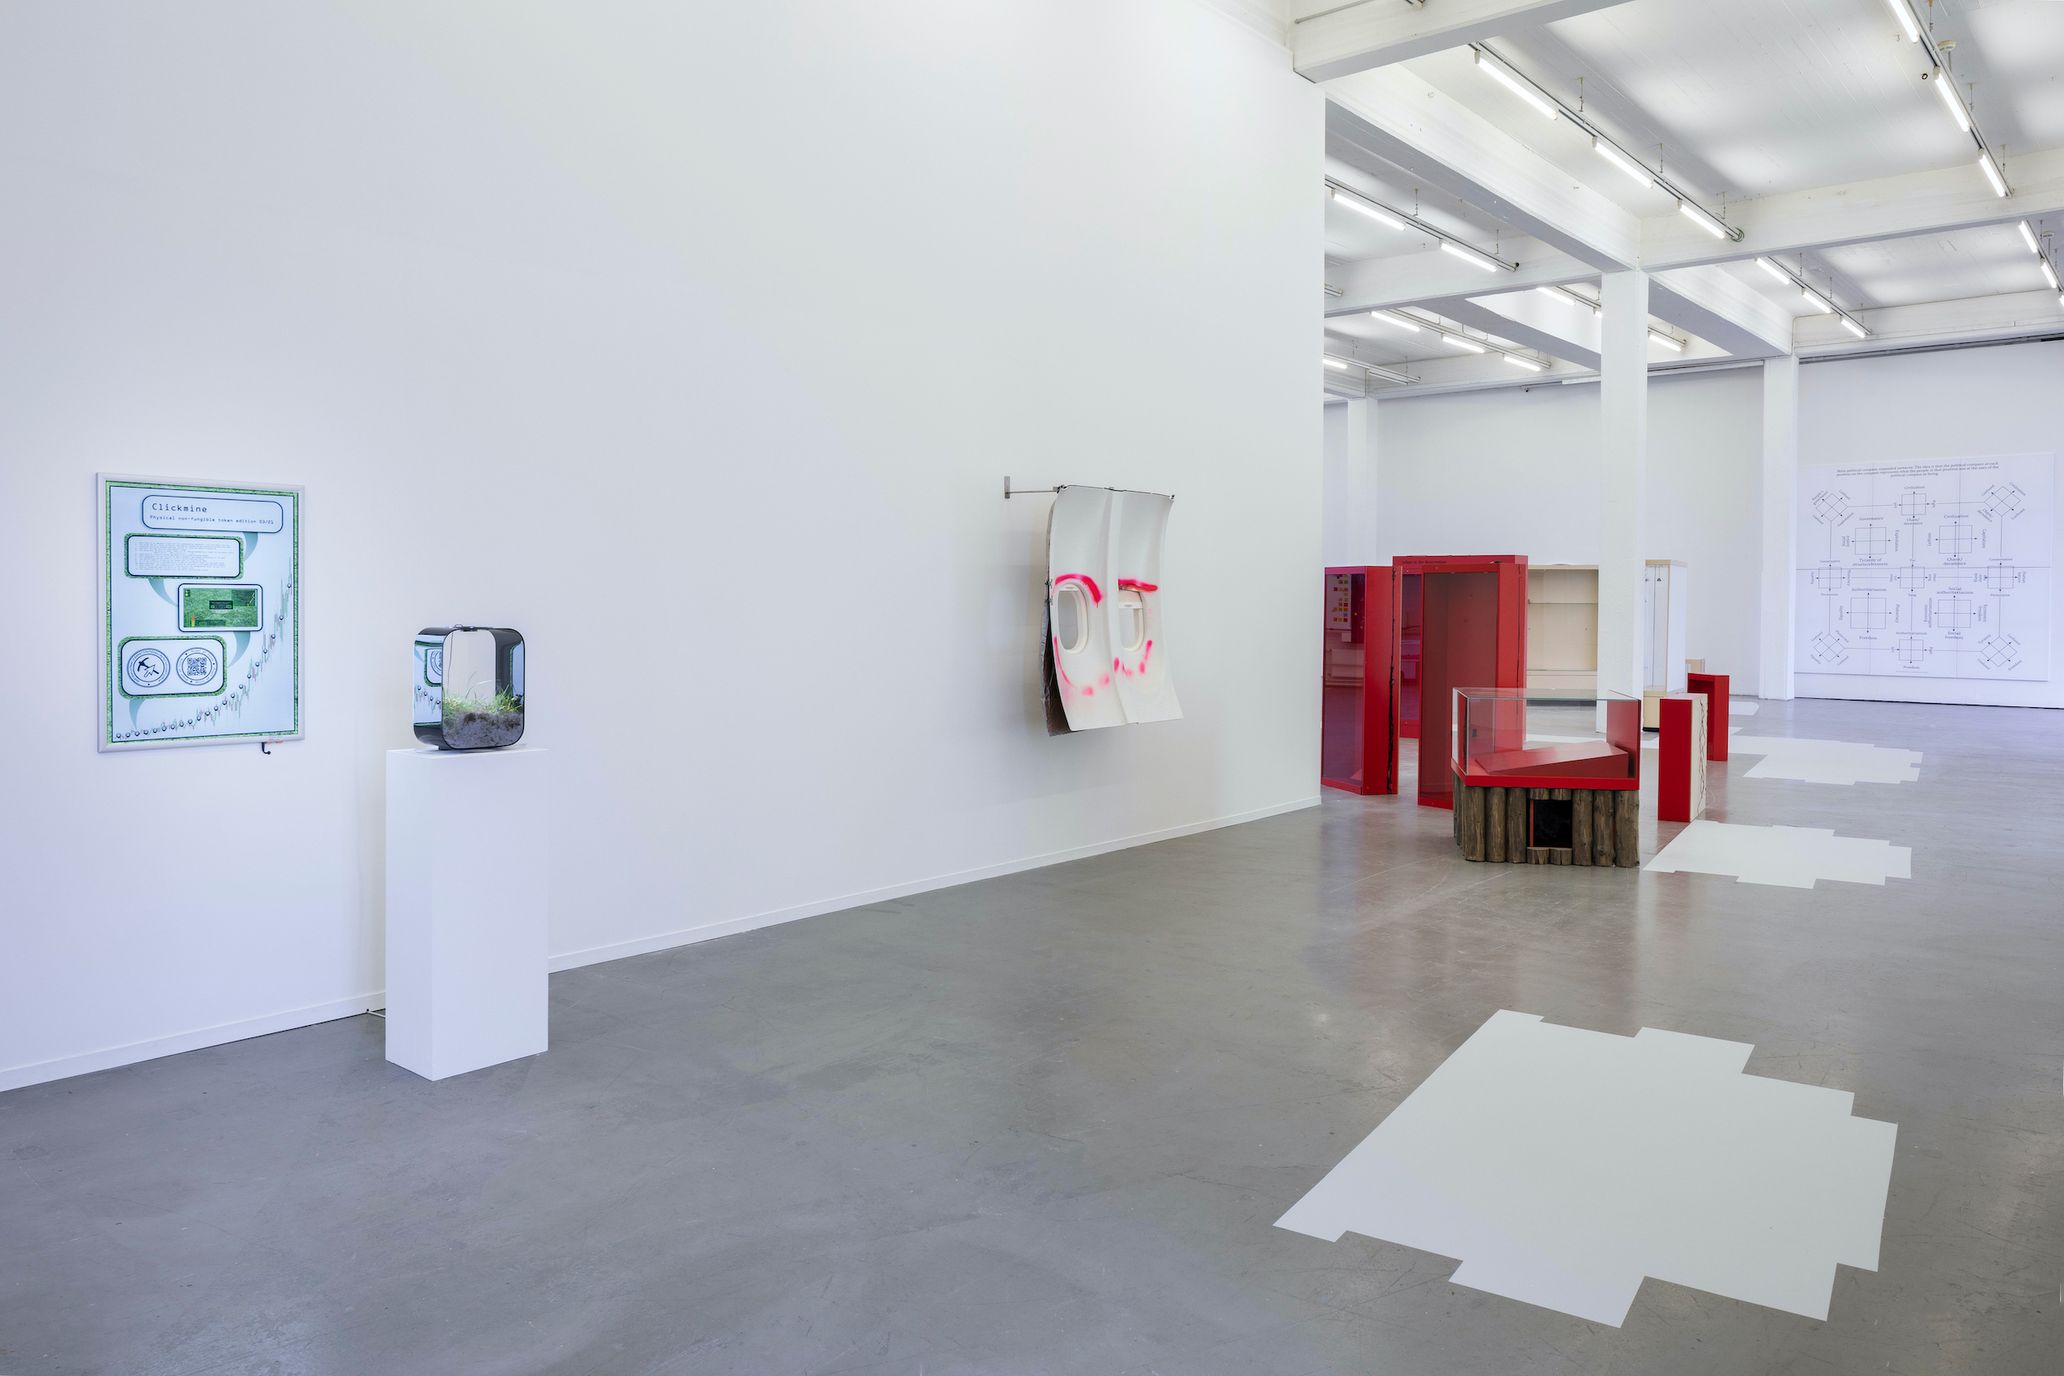 Proof of Stake
Installation View, Proof of Stake – Technological Claims, Kunstverein in Hamburg, 2021
Photography Fred Dott